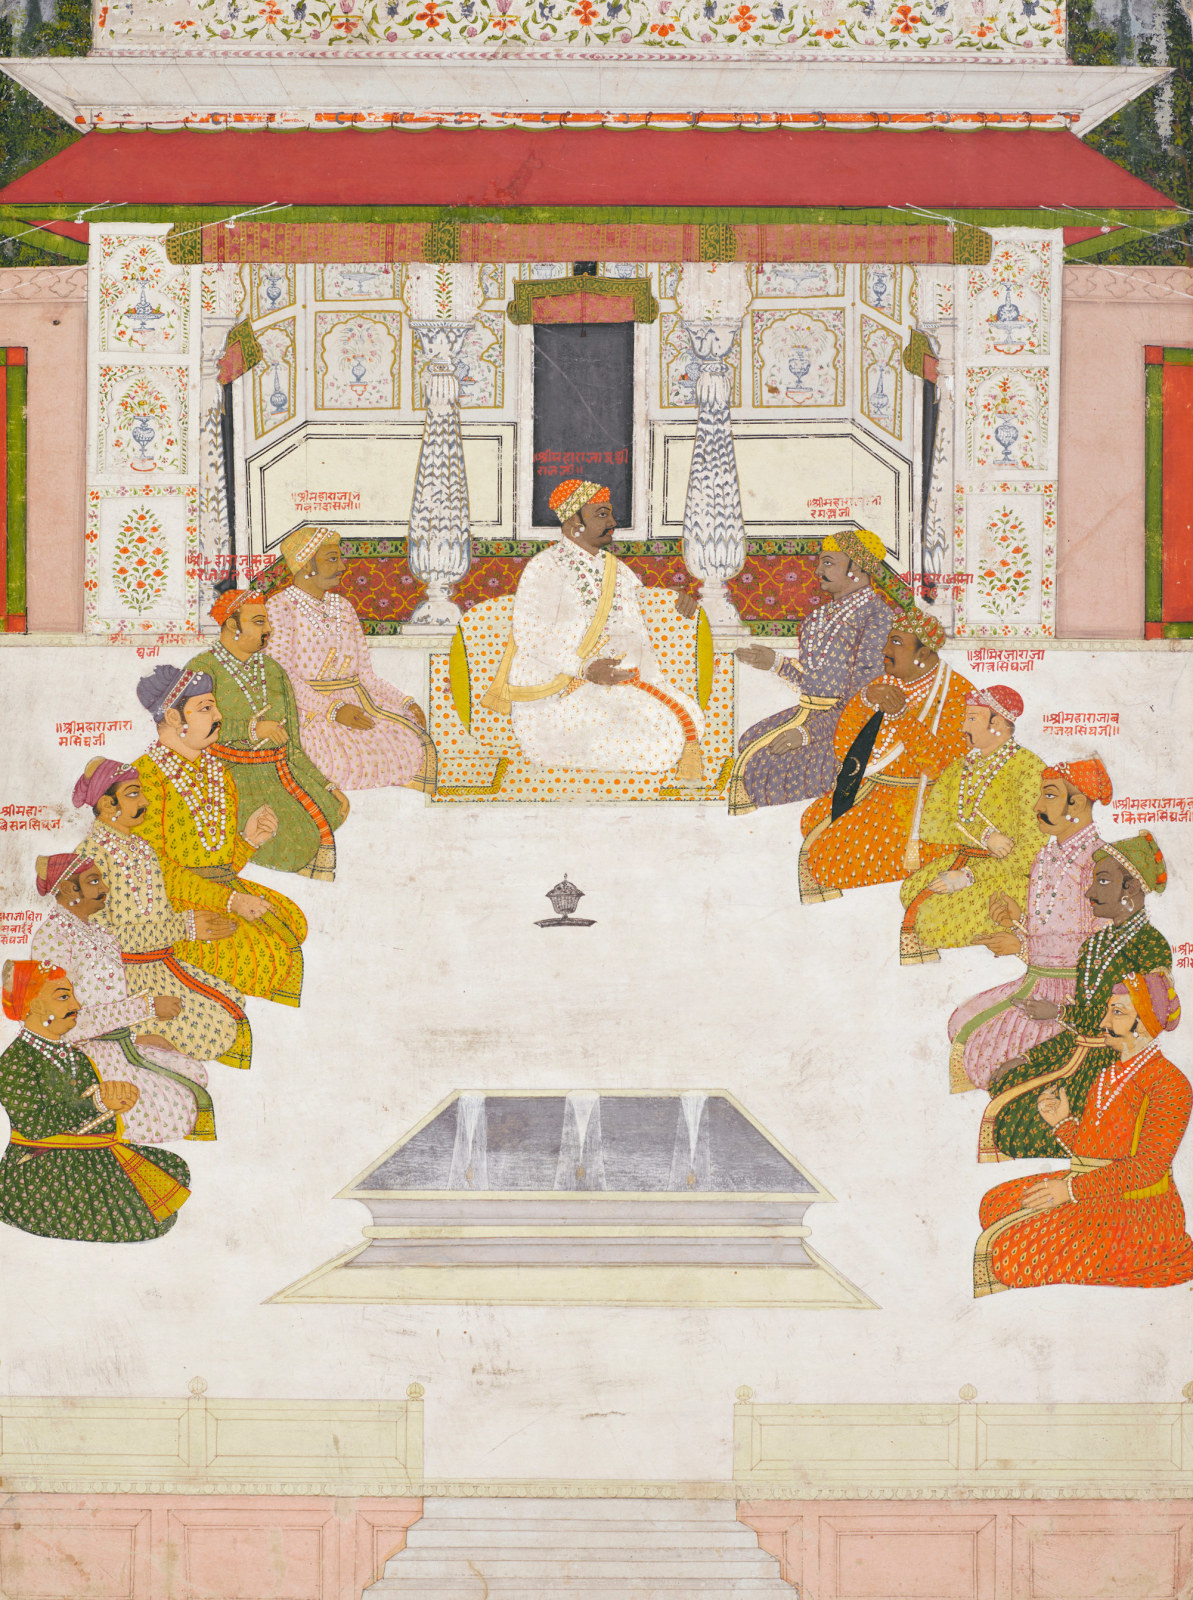 Ancestral Portraits of the Rulers of Amber and Jaipur, By a Jaipur artist, circa 1750-1760